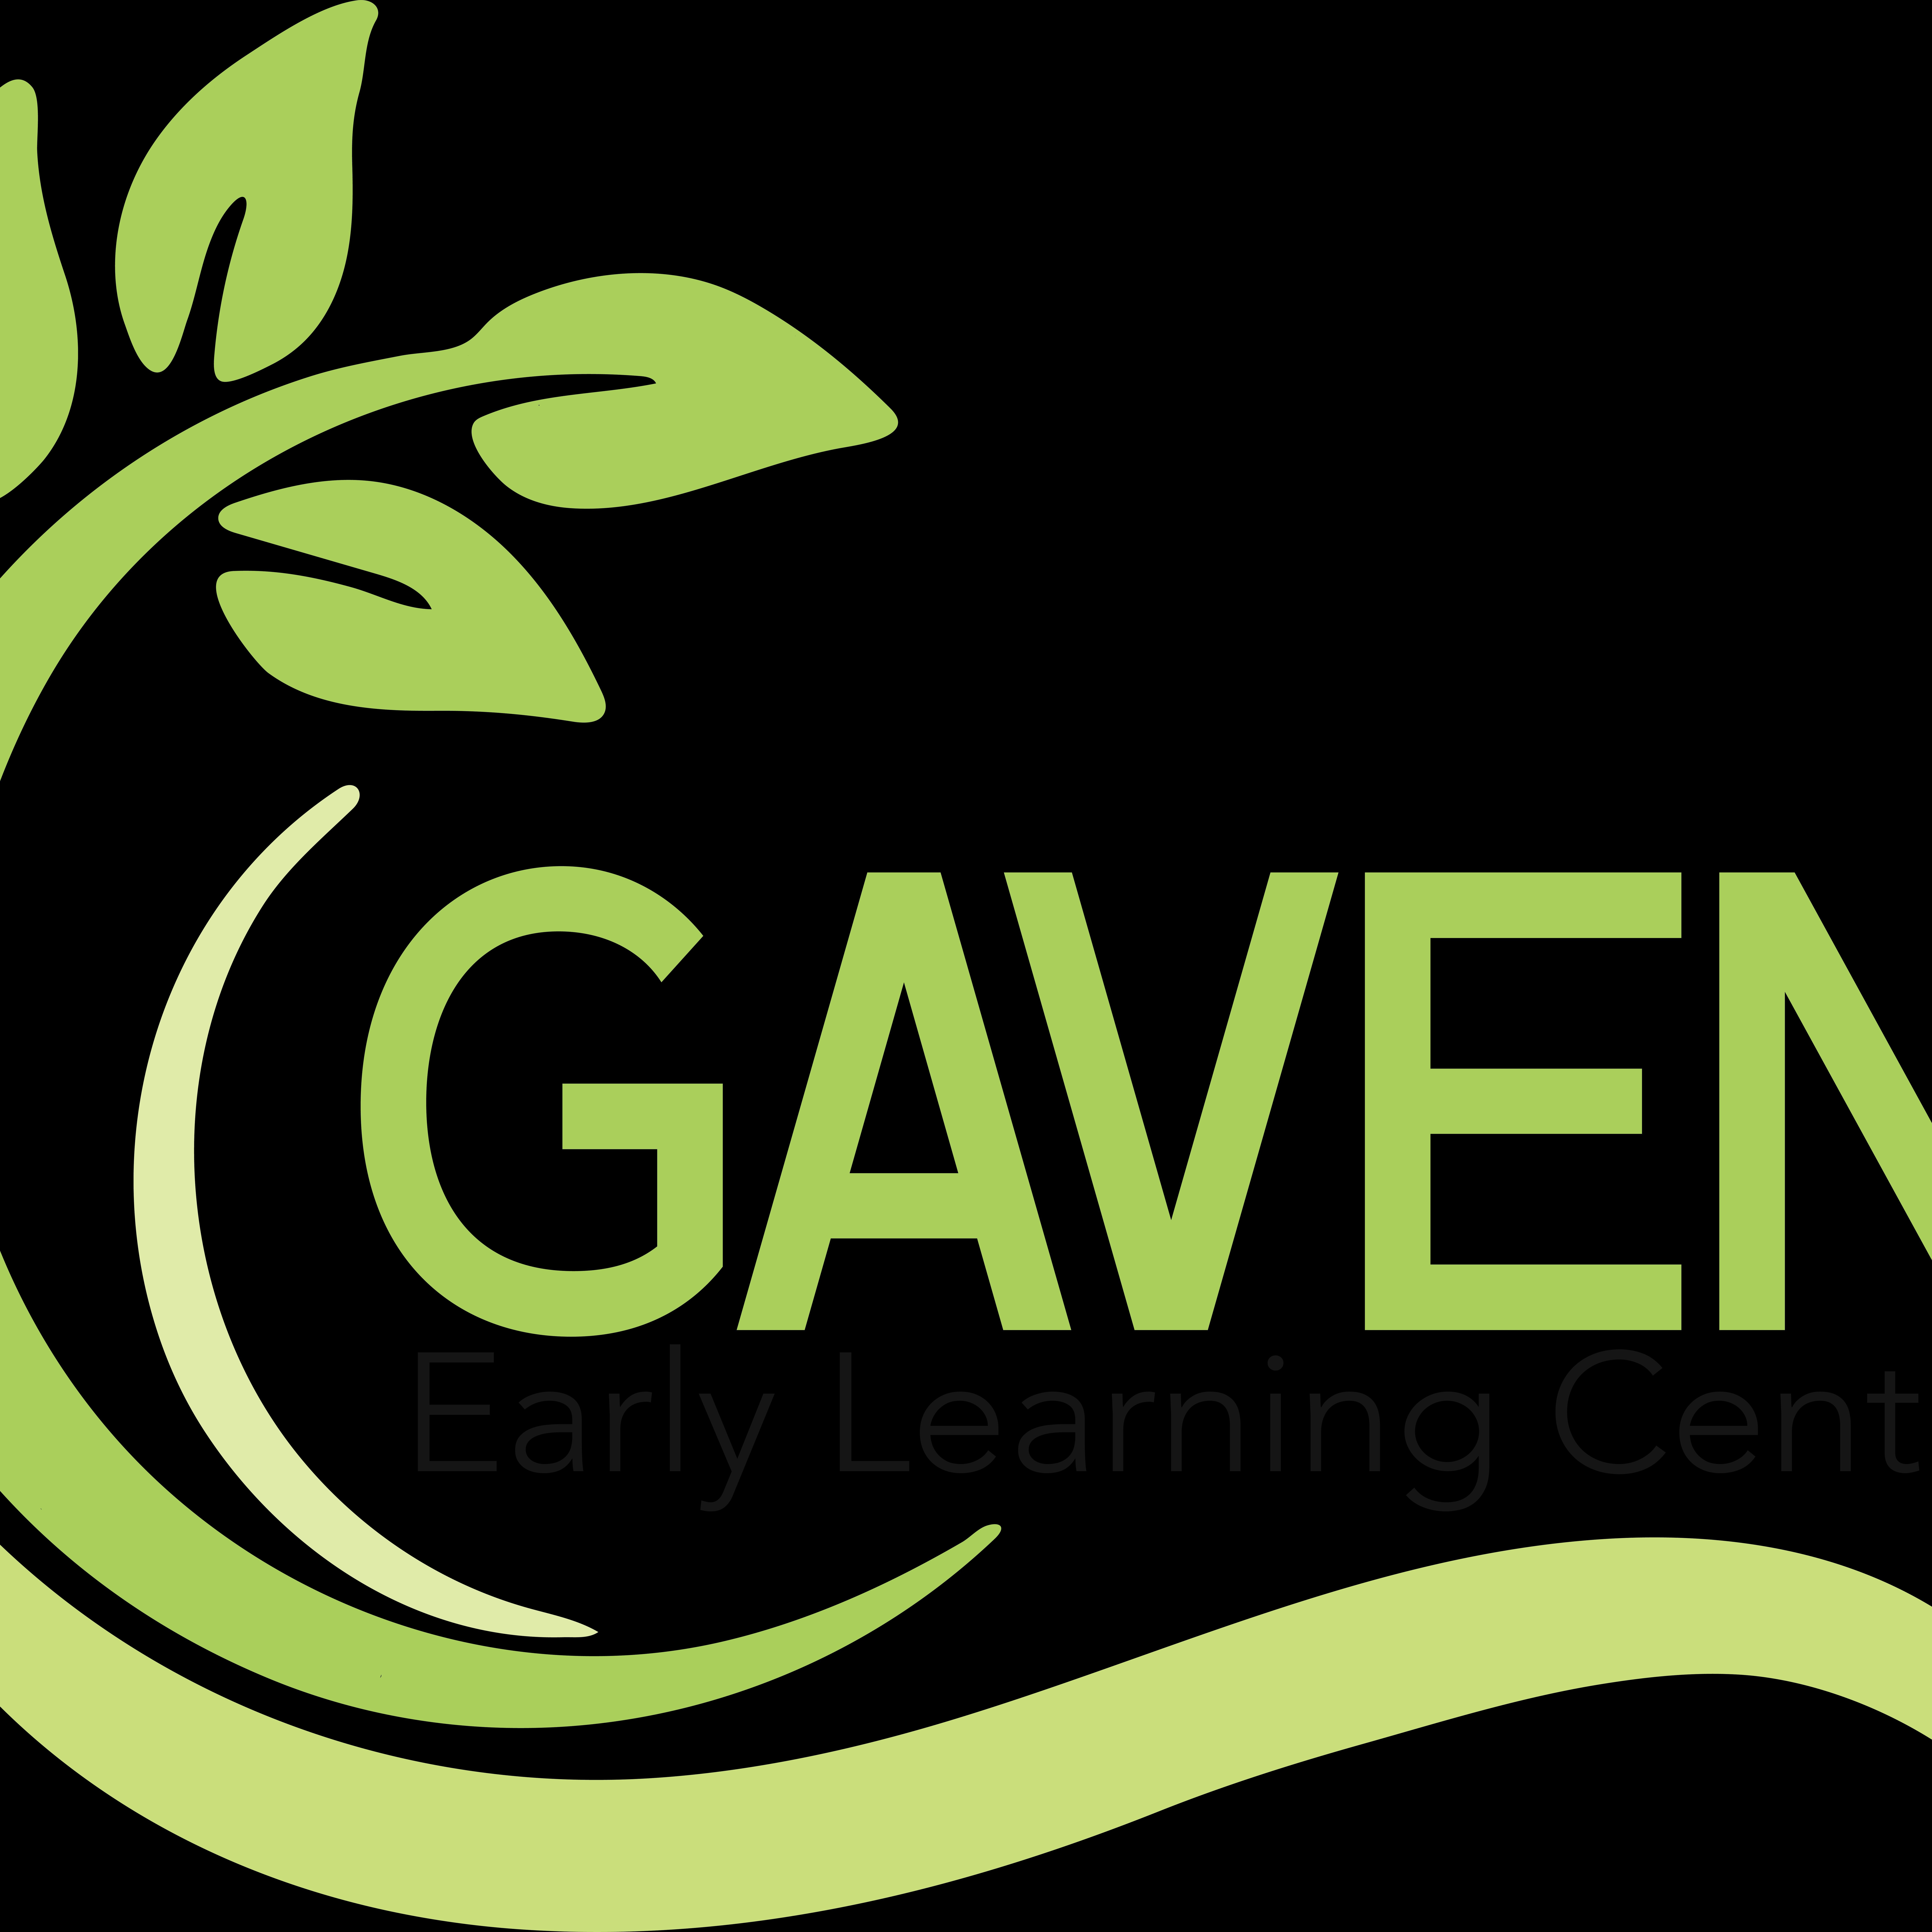 Gaven Early Learning Centre